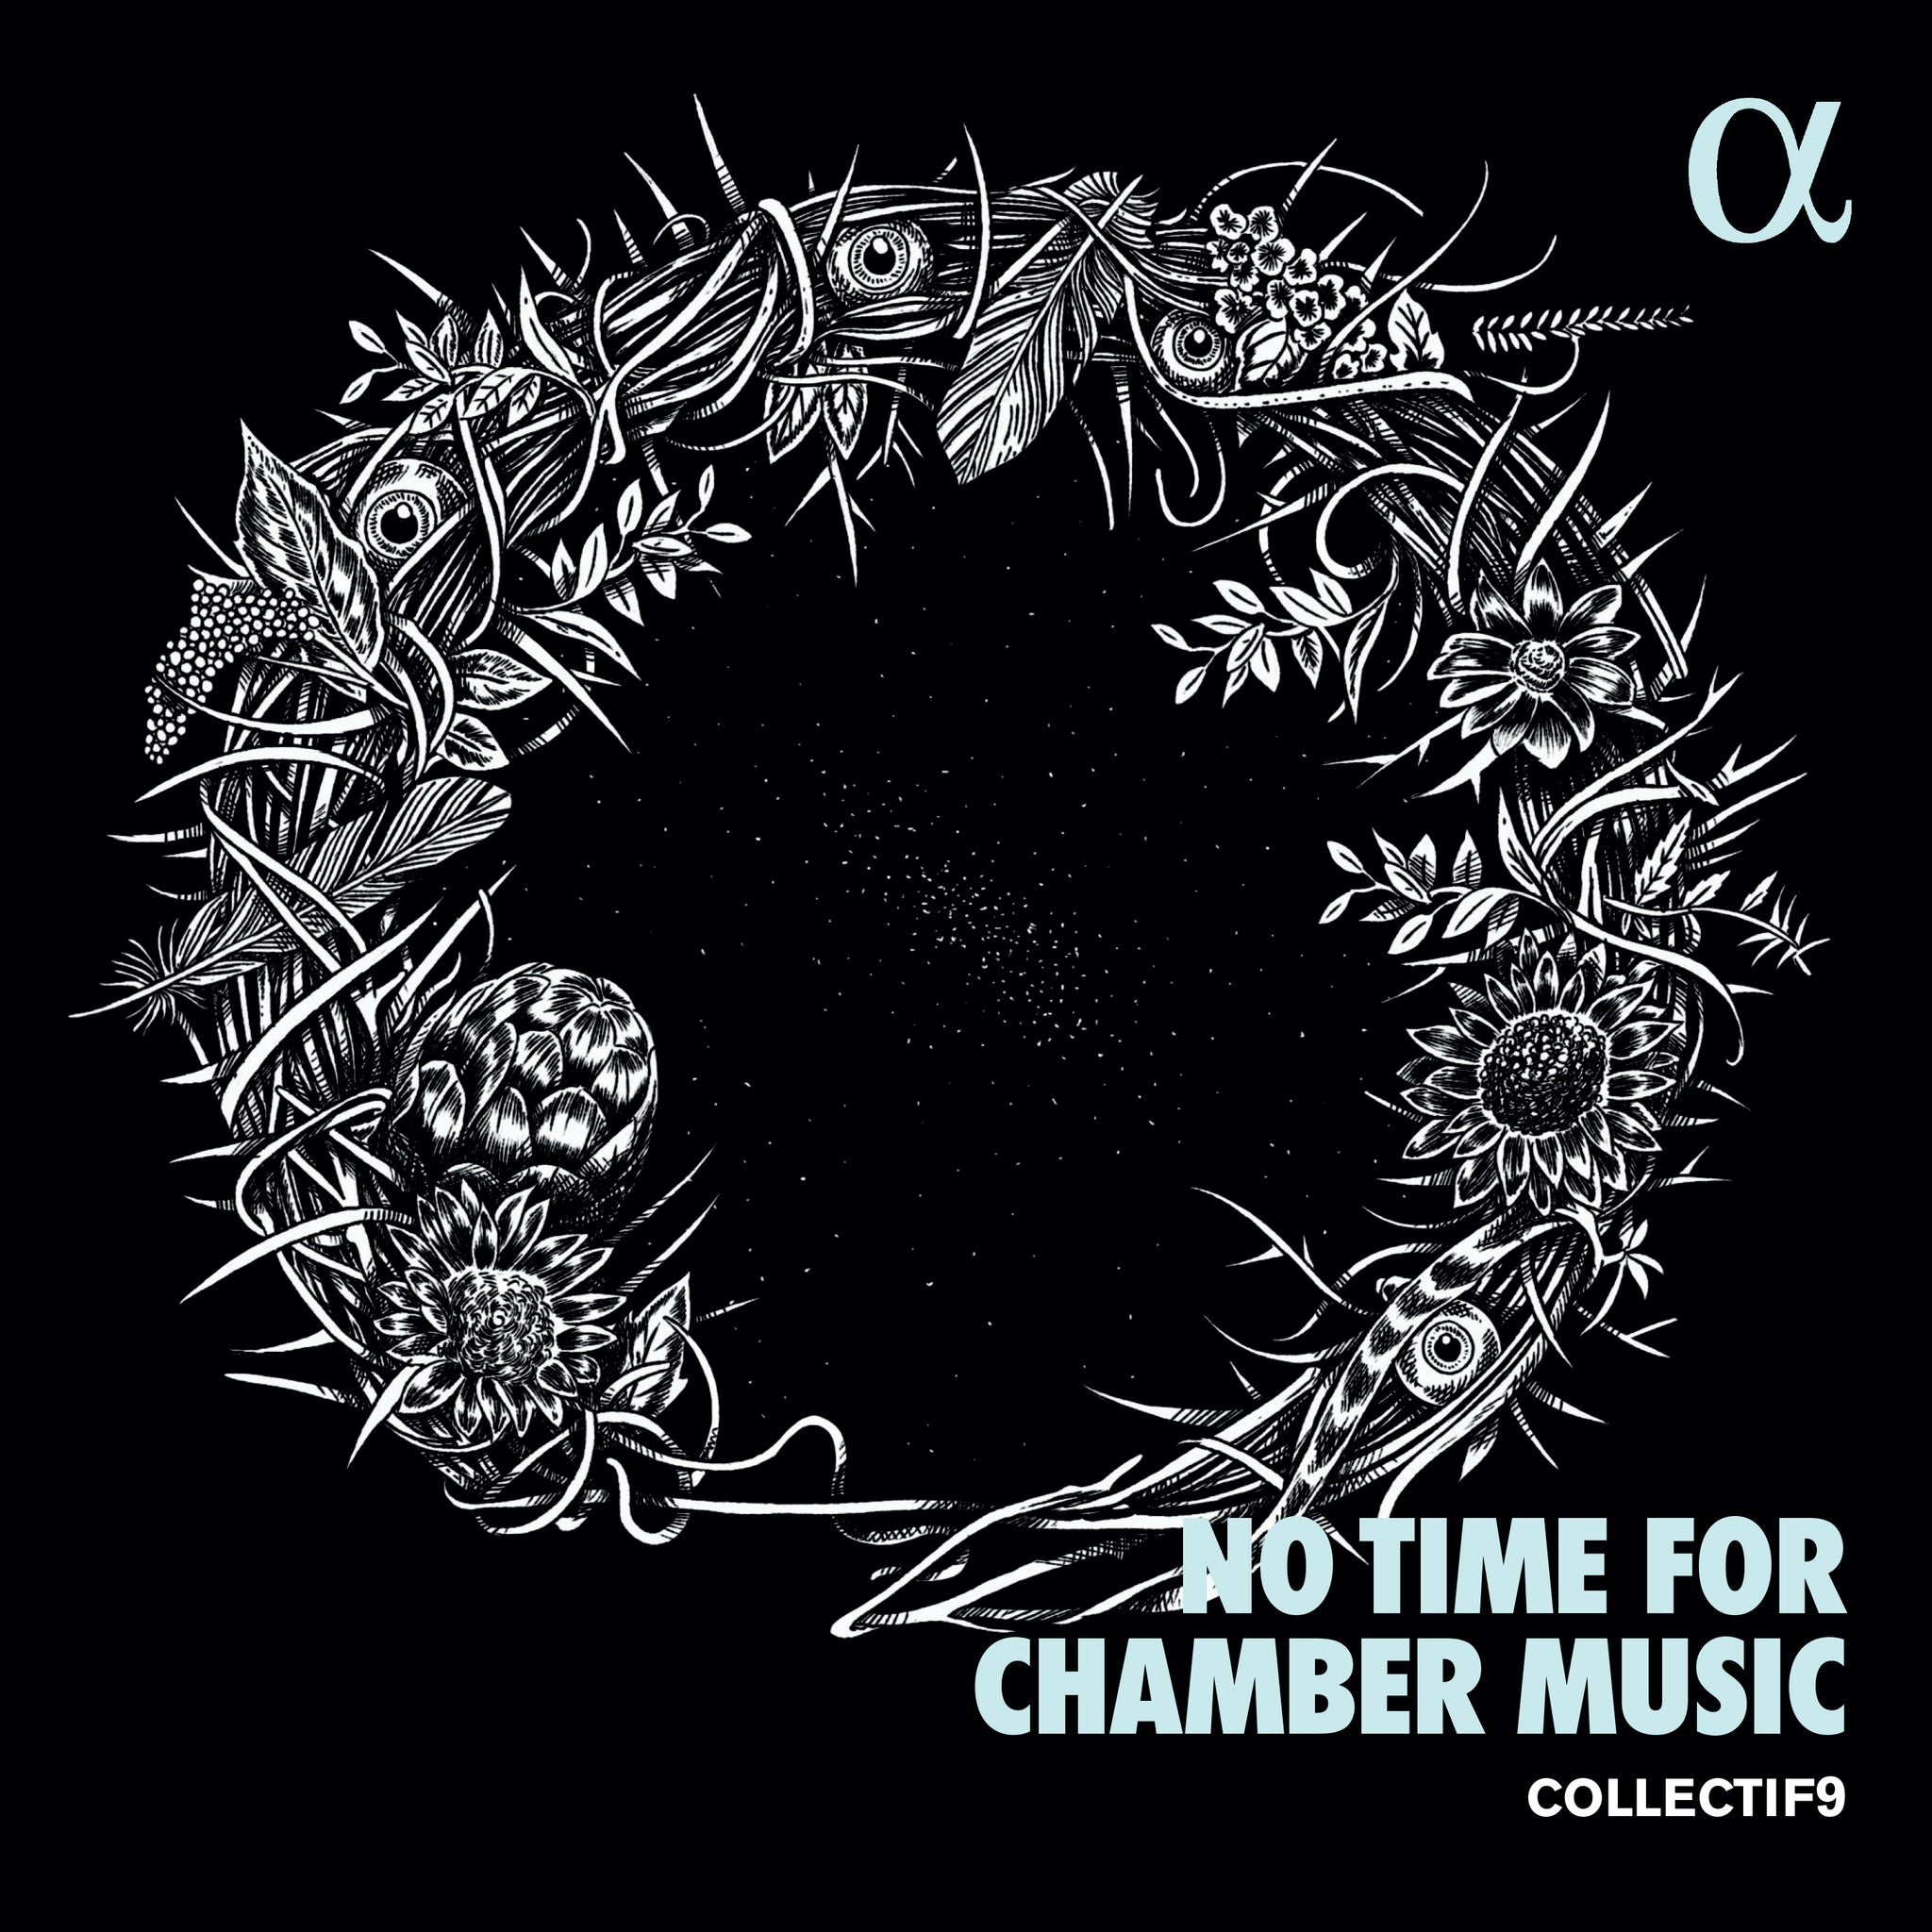 No Time for Chamber Music / Collectif9